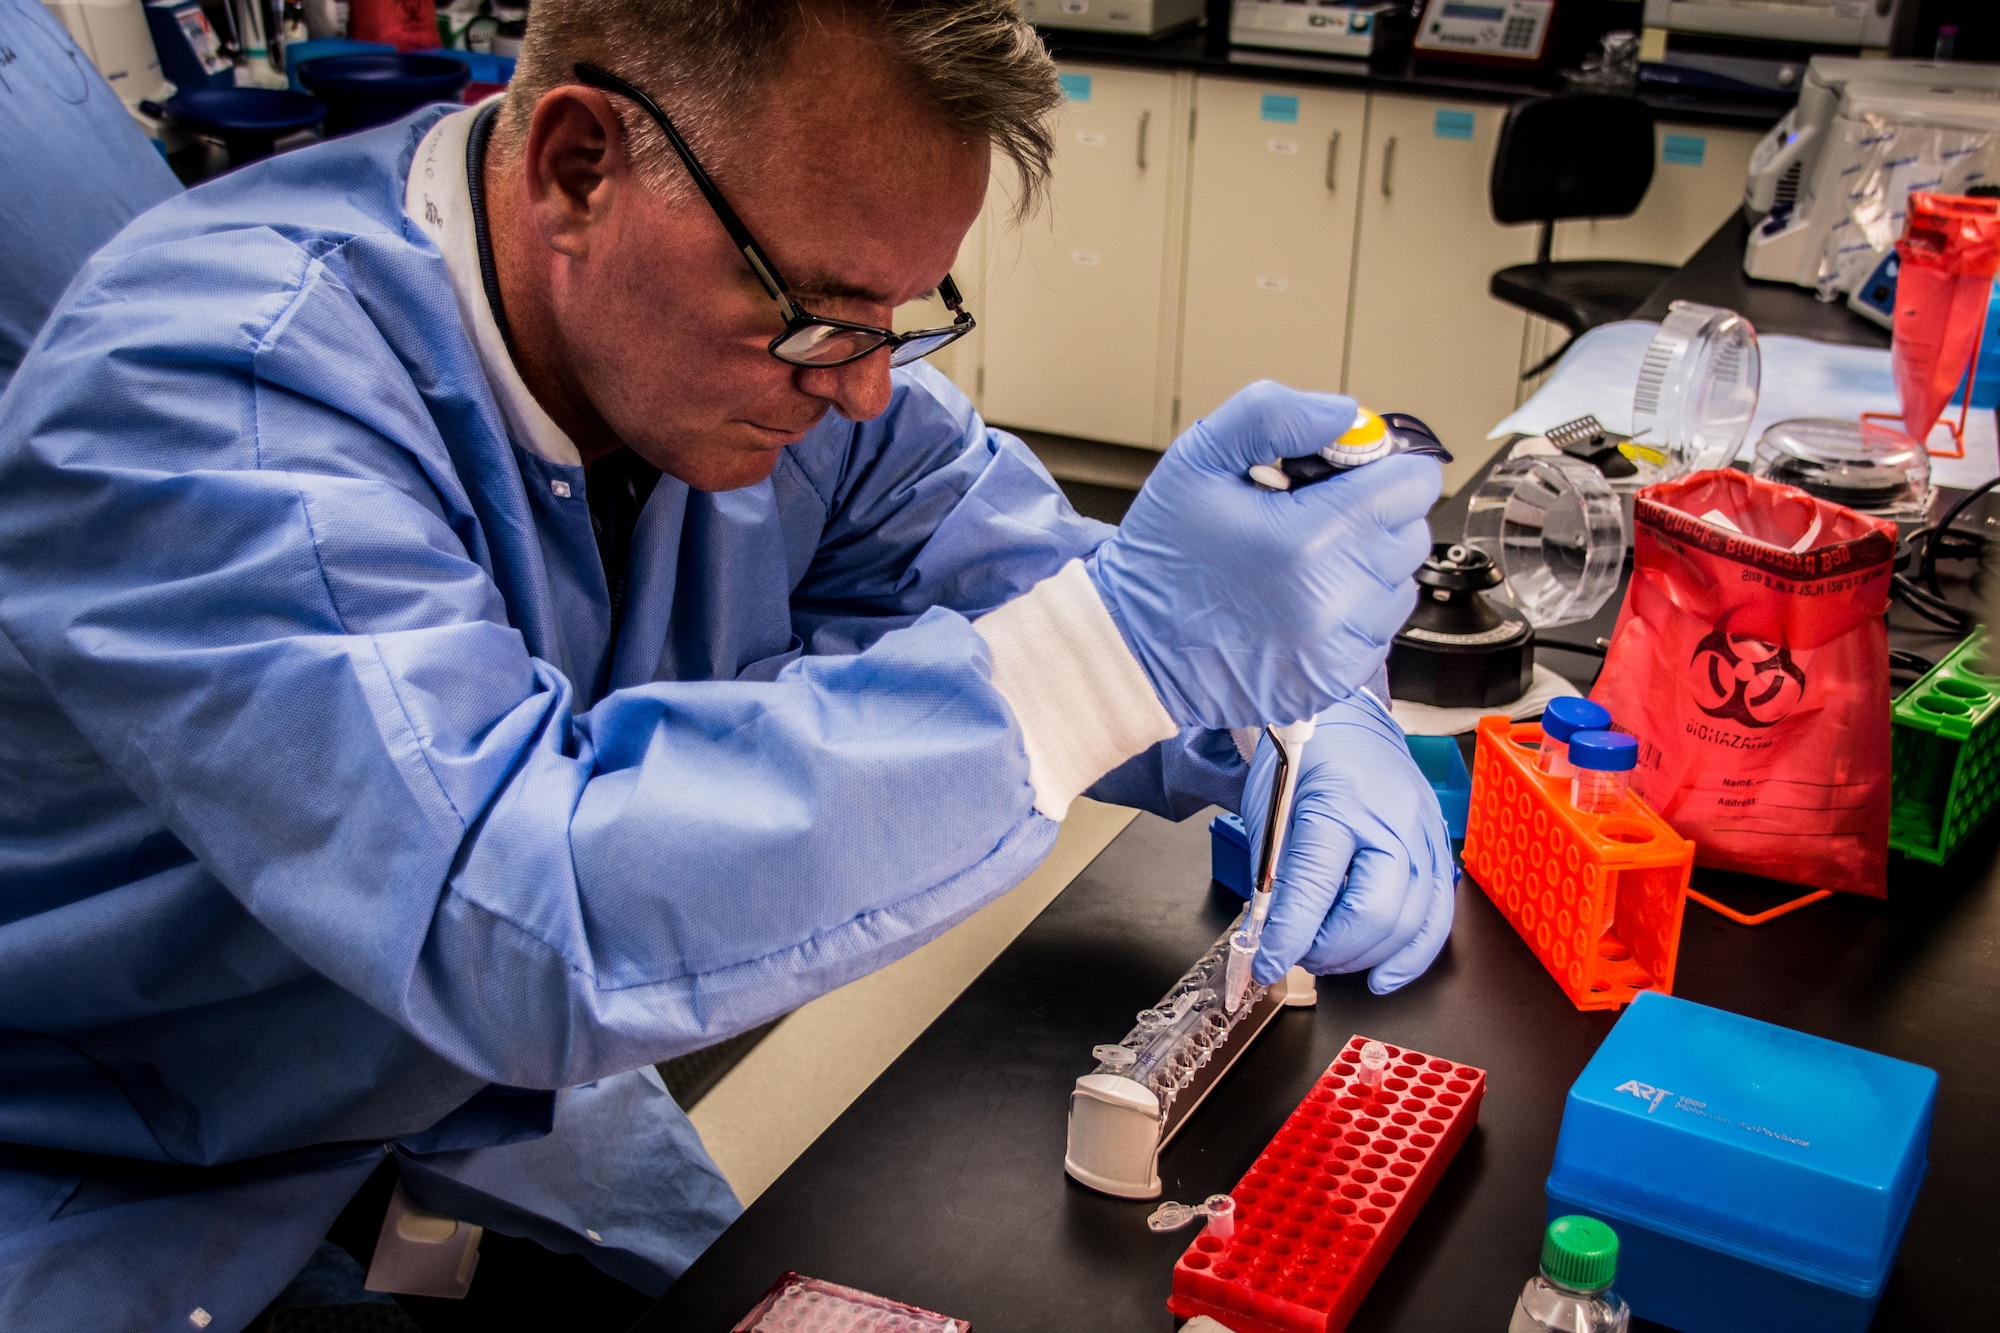 John Trombley, a biomedical lab technician at the U.S. Air Force School of Aerospace Medicine, works on exome sequencing to observe gene expression under hypoxic conditions for Air Force personnel. Gene expression can dramatically change to cope with environmental stressors. Efforts are underway to determine what genes are either up or down regulated under hypoxic conditions experienced by flight personnel. (U.S. Air Force photo/Richard Eldridge)